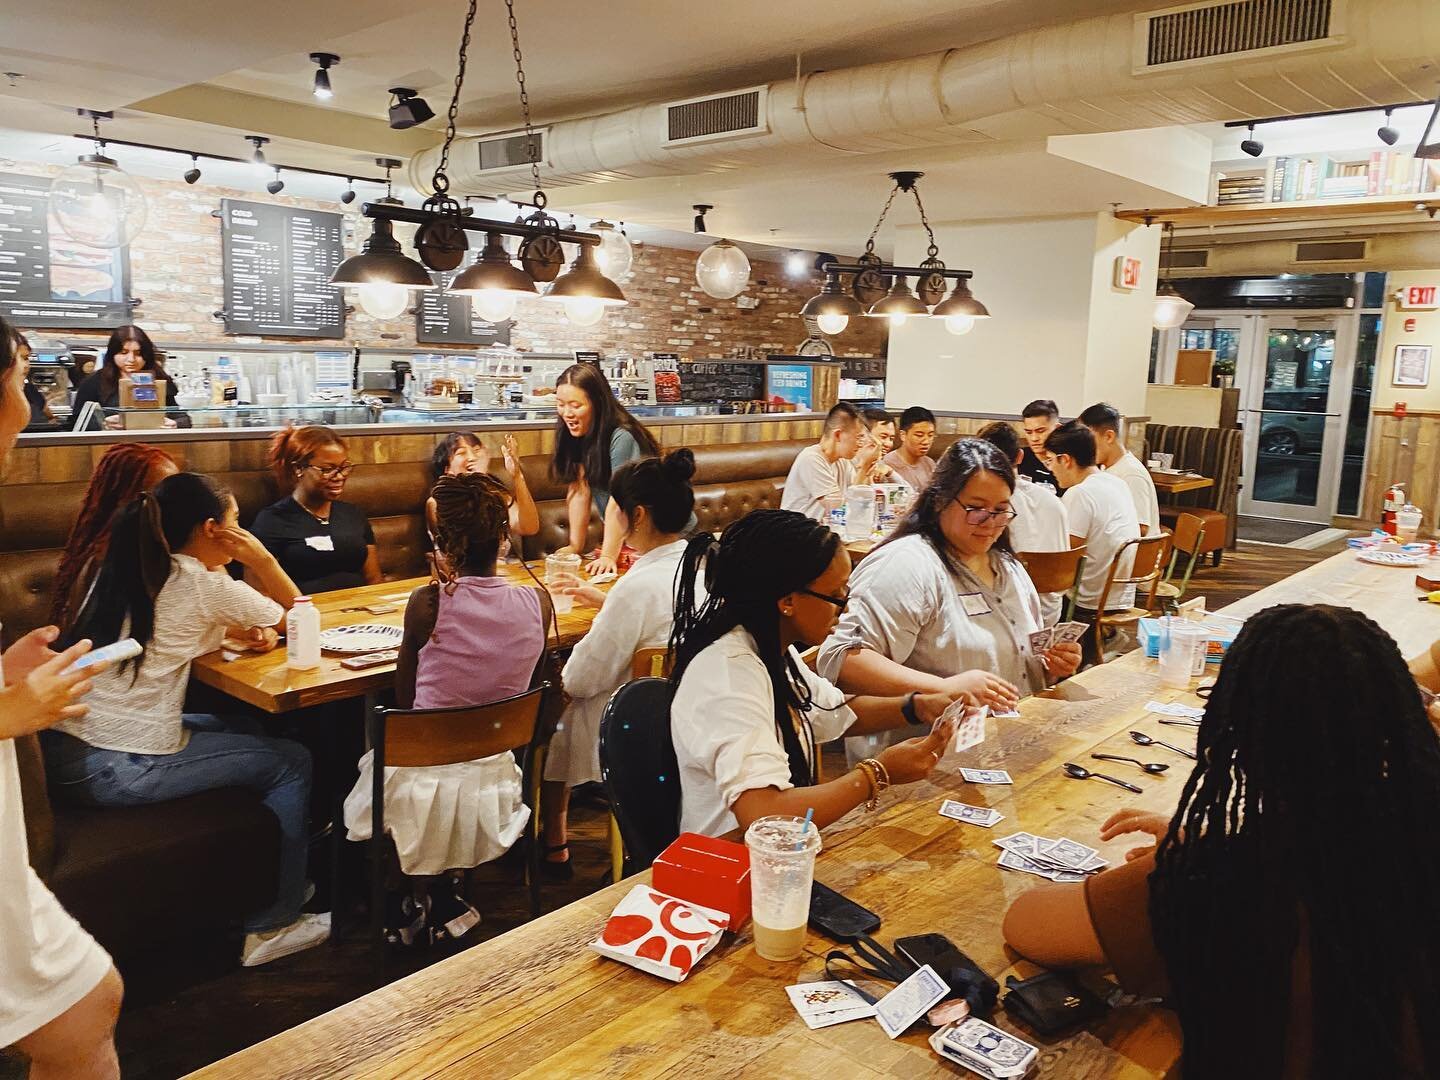 Excited to be kicking off our Bible Study this Friday at this fun cafe ☕️ near BU. Details ⬇️

Time: Fridays, 7PM -9PM
Location: Caff&egrave; Nero (Commonwealth Ave)
This week&rsquo;s Menu: Japnese Katsu Curry 🍛 🧑&zwj;🍳 

All college students are 